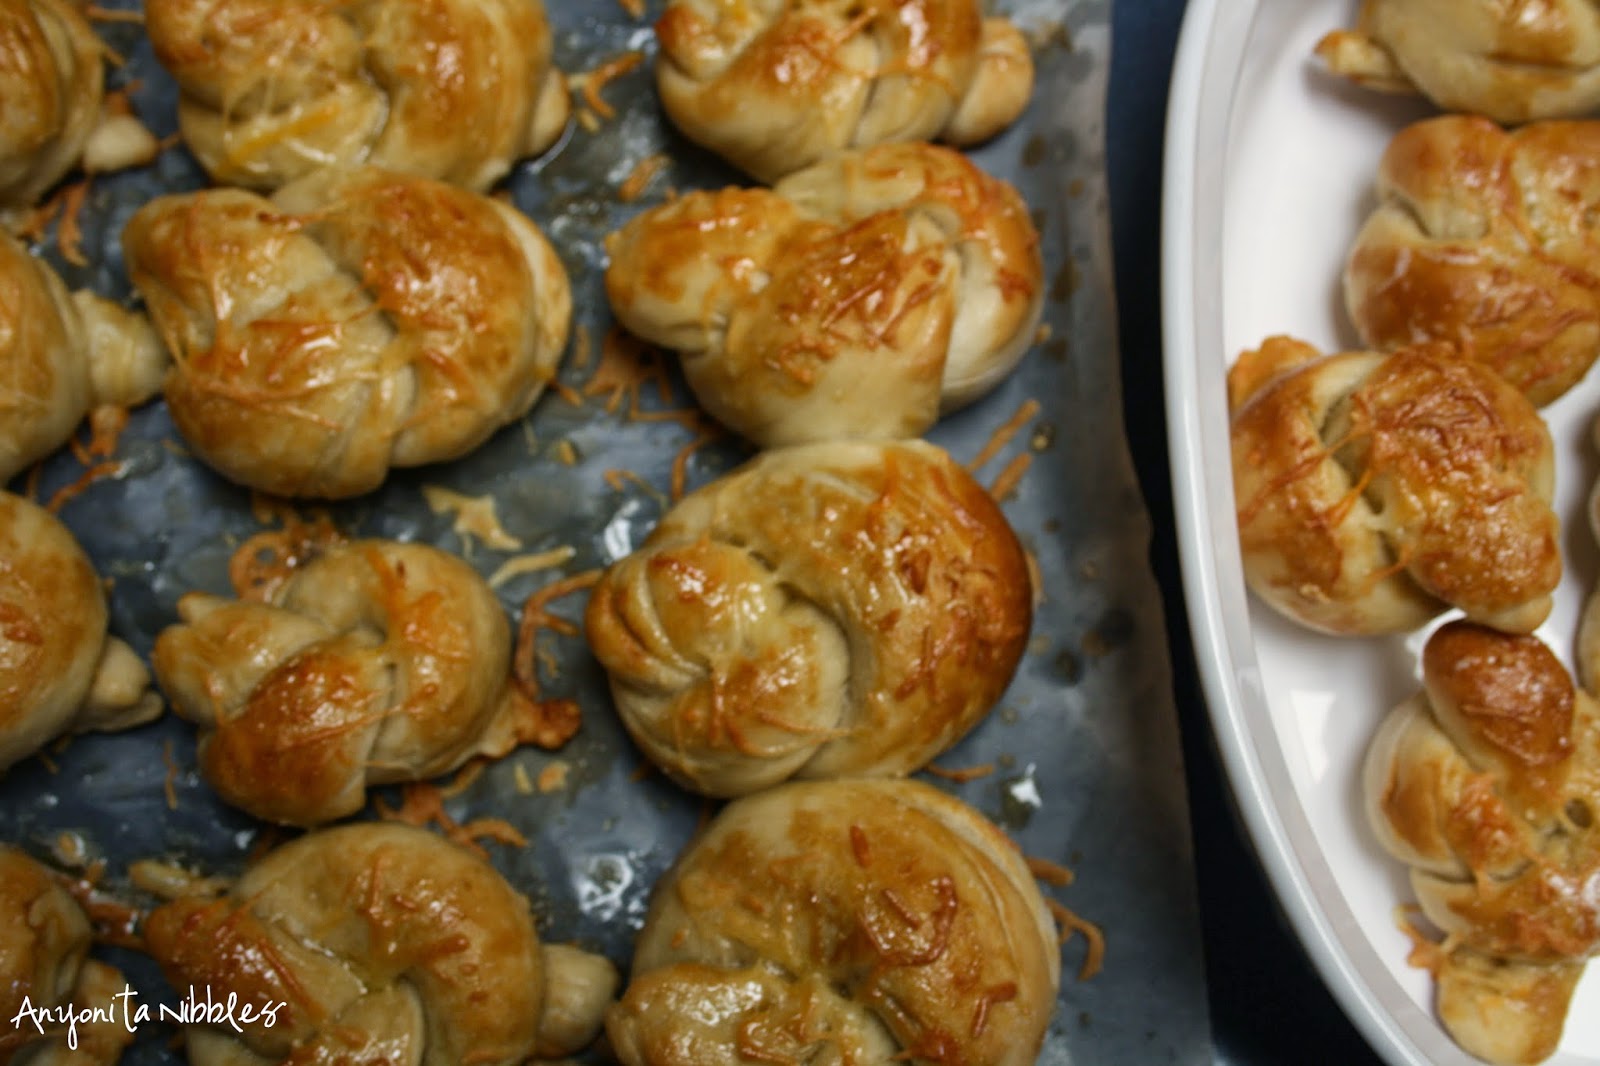 Soft Pretzel Knots with Cheese and Honey Butter ready to eat from www.anyonita-nibbles.com